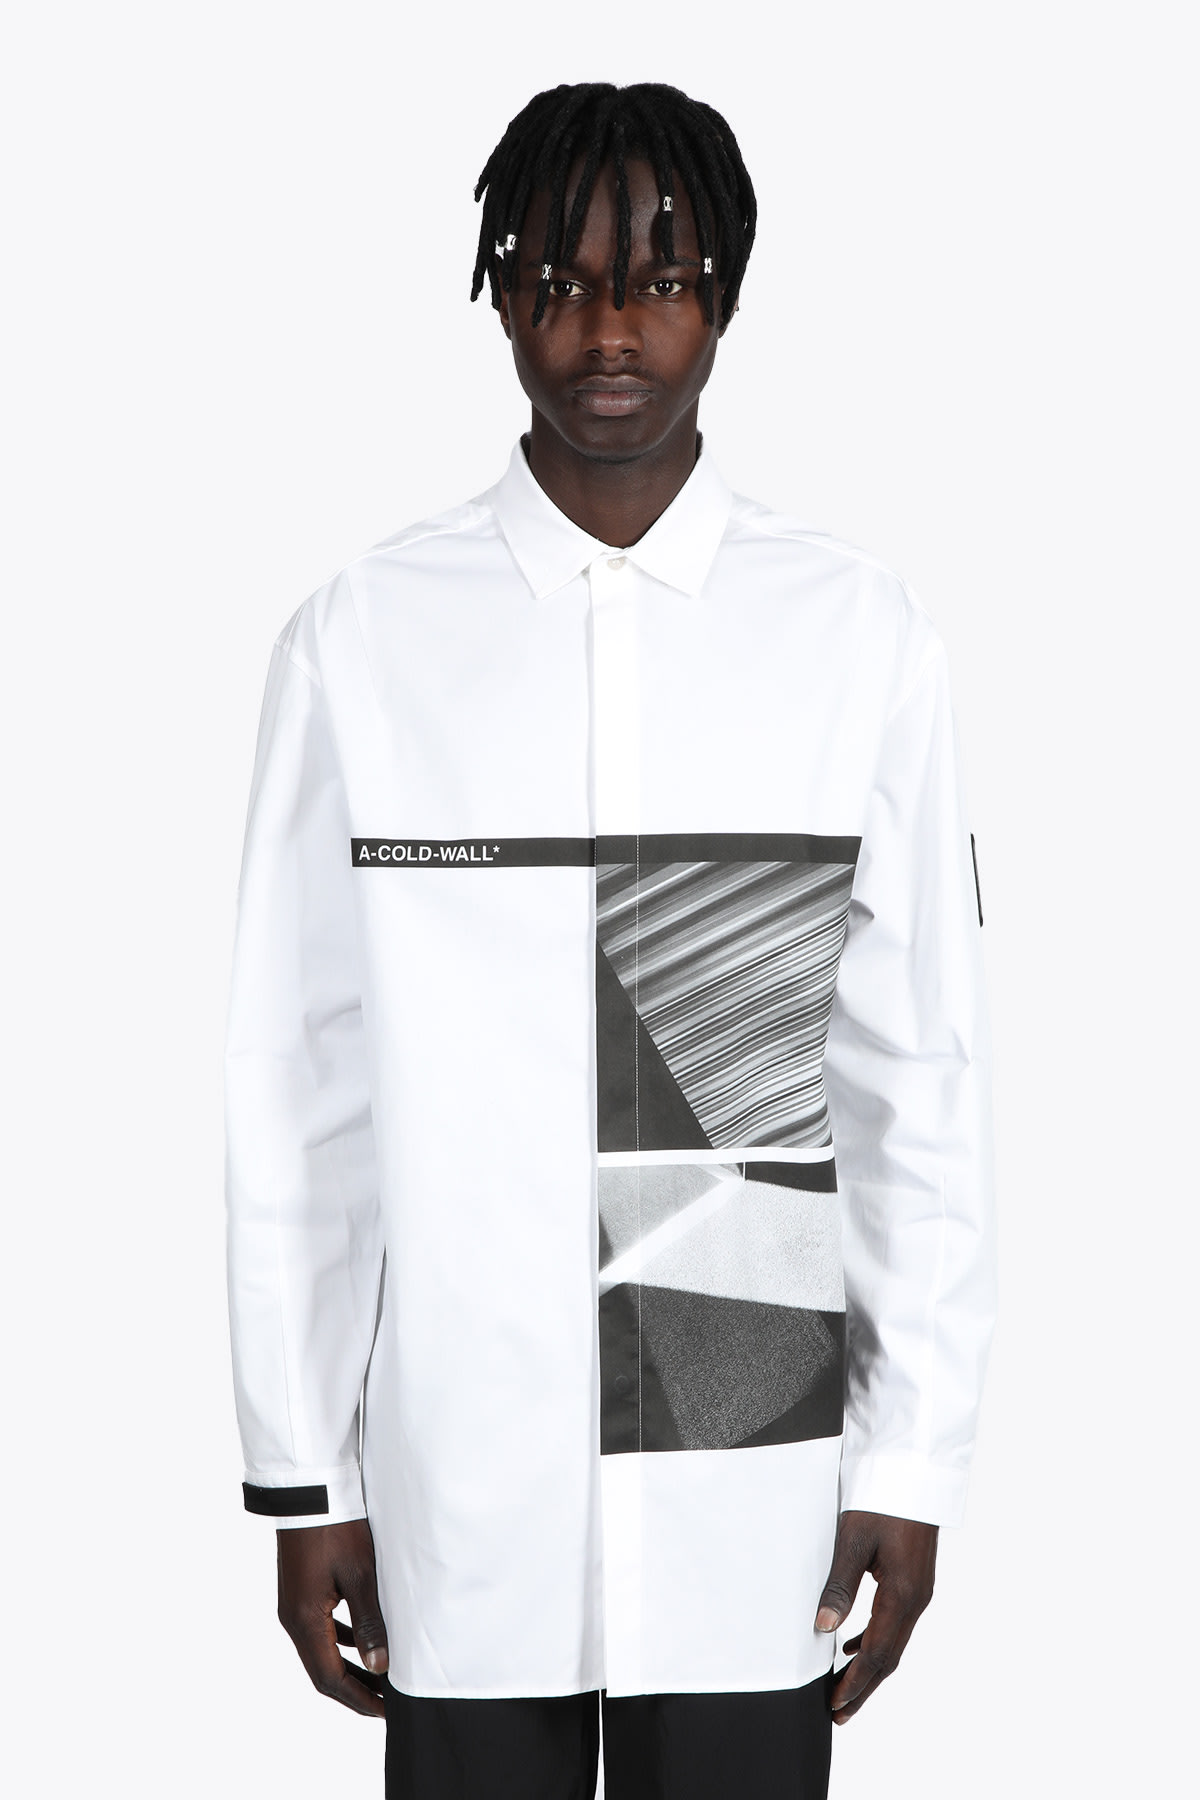 A-COLD-WALL Woven Testa Shirt White cotton shirt with photographic print